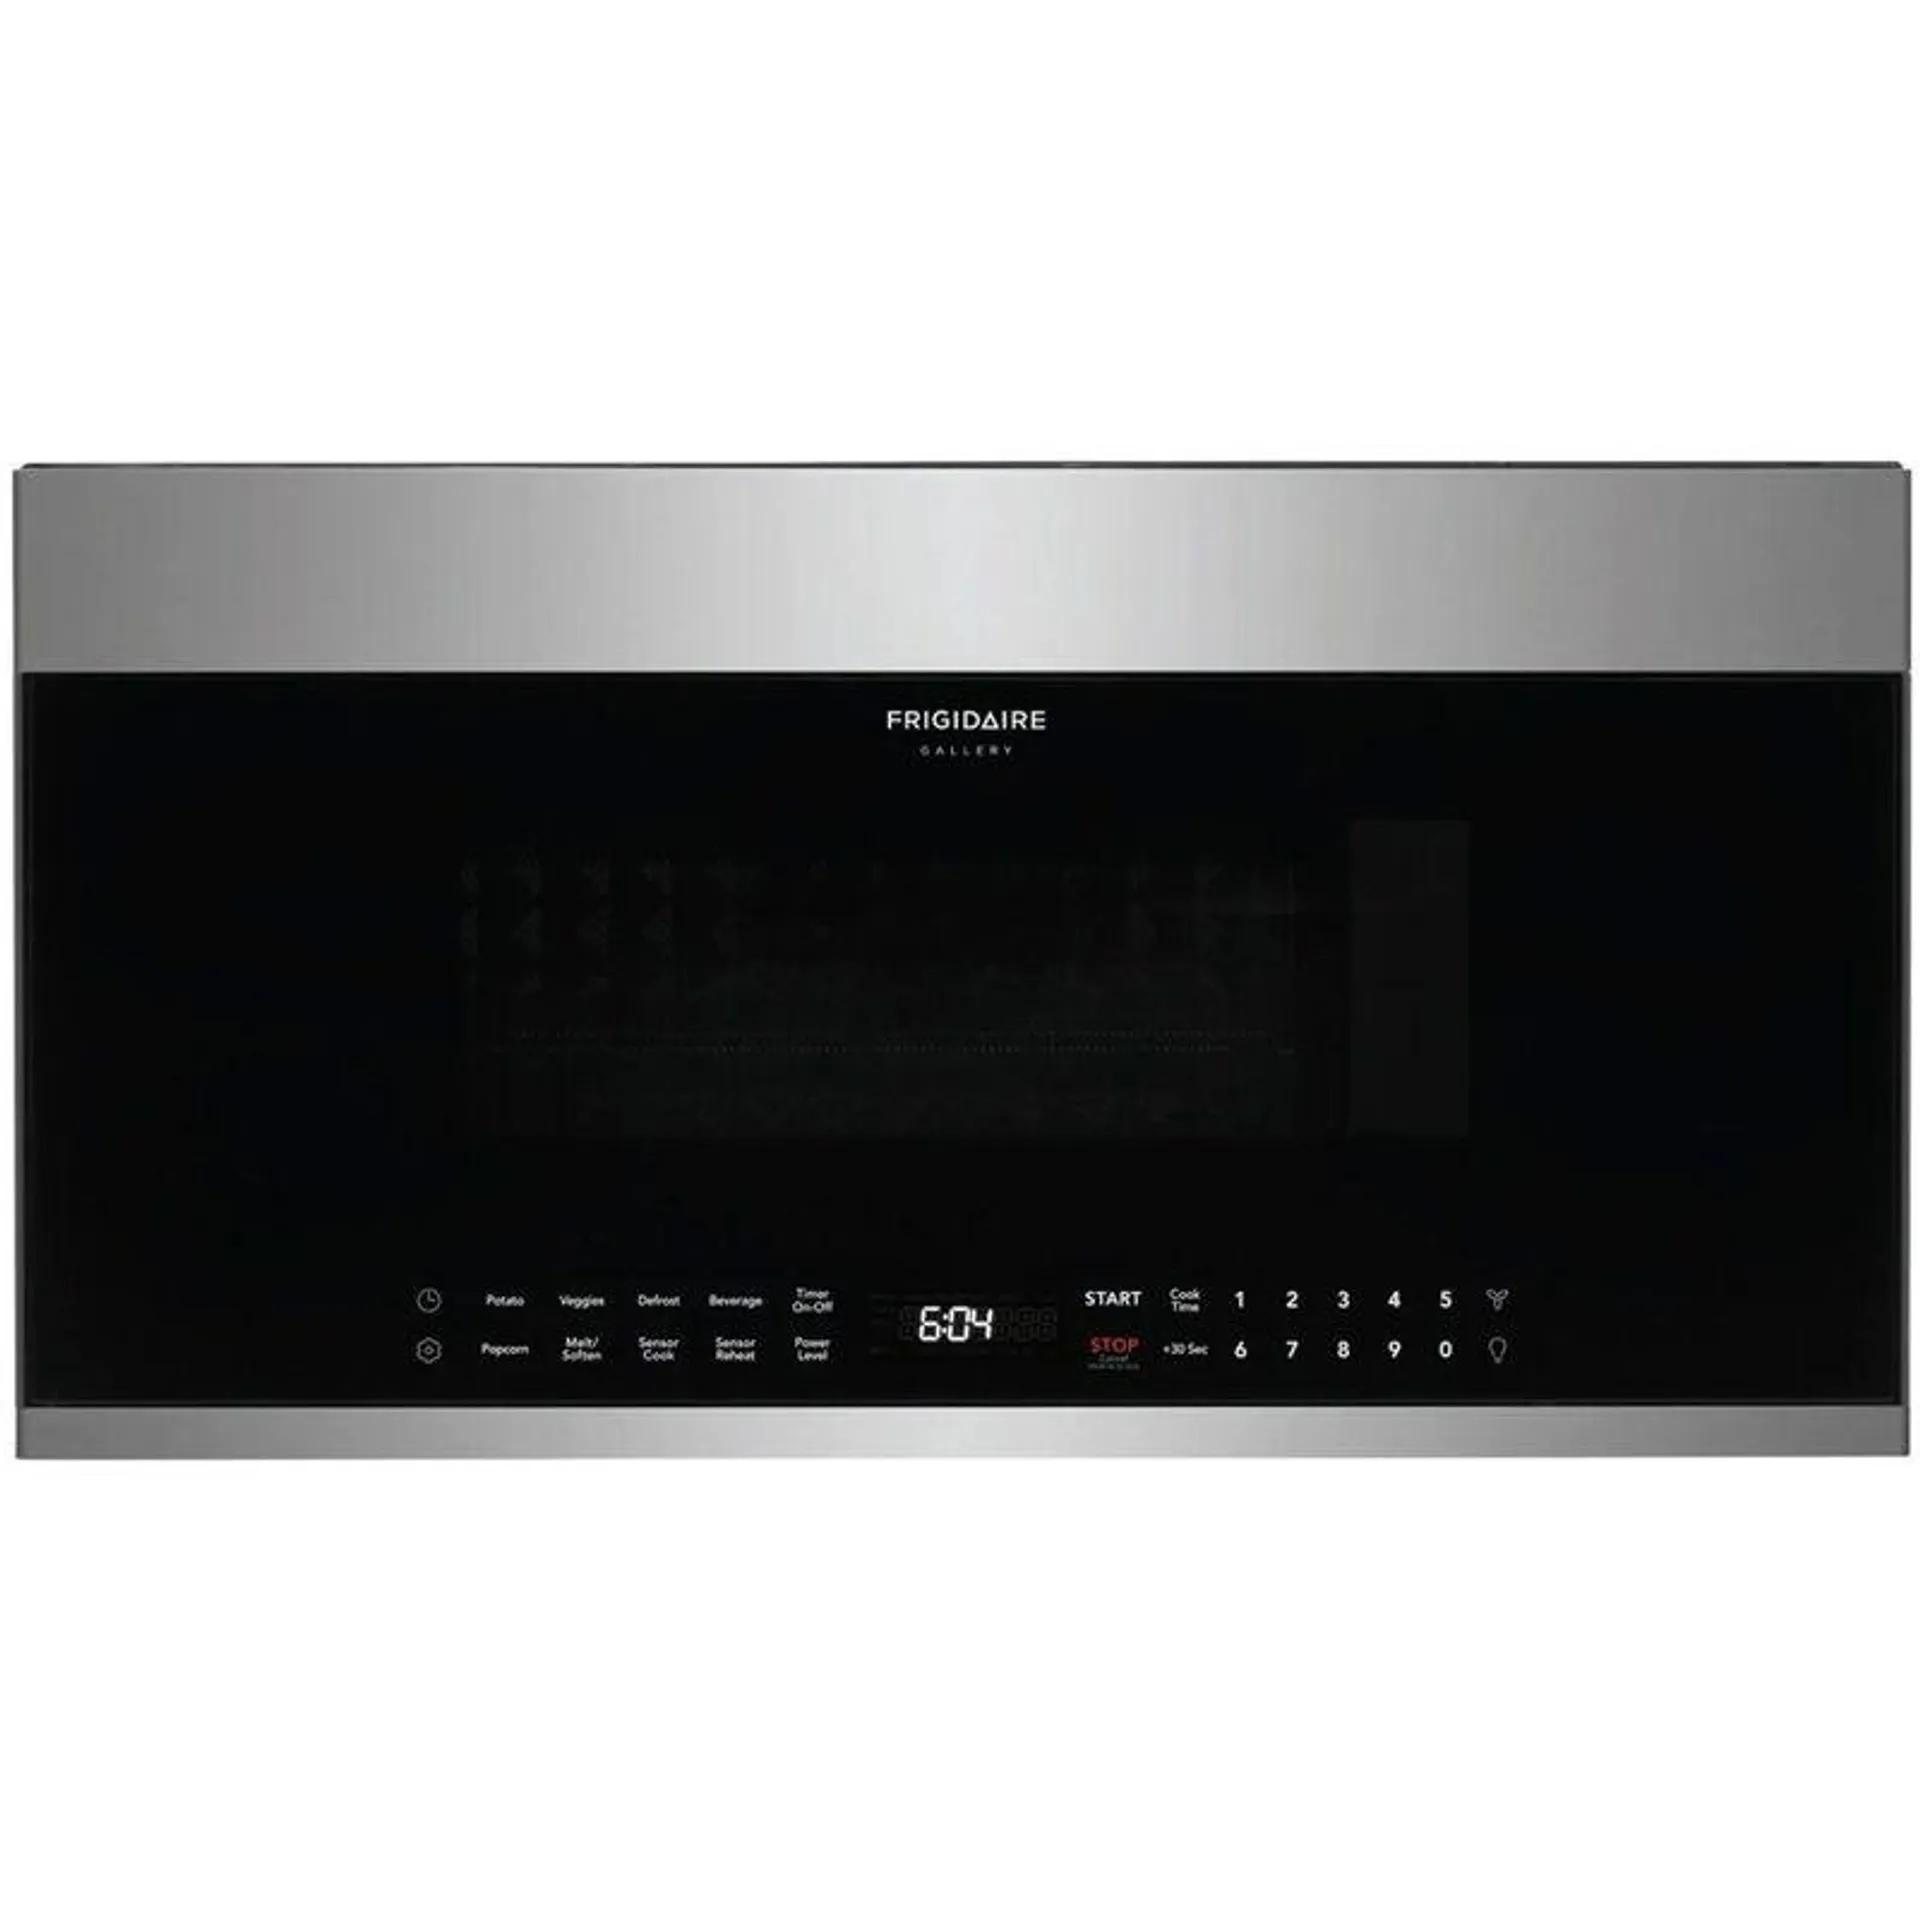 Frigidaire Gallery 30" 1.9 Cu. Ft. Over-the-Range Microwave with 9 Power Levels, 400 CFM & Sensor Cooking Controls - Stainless Steel